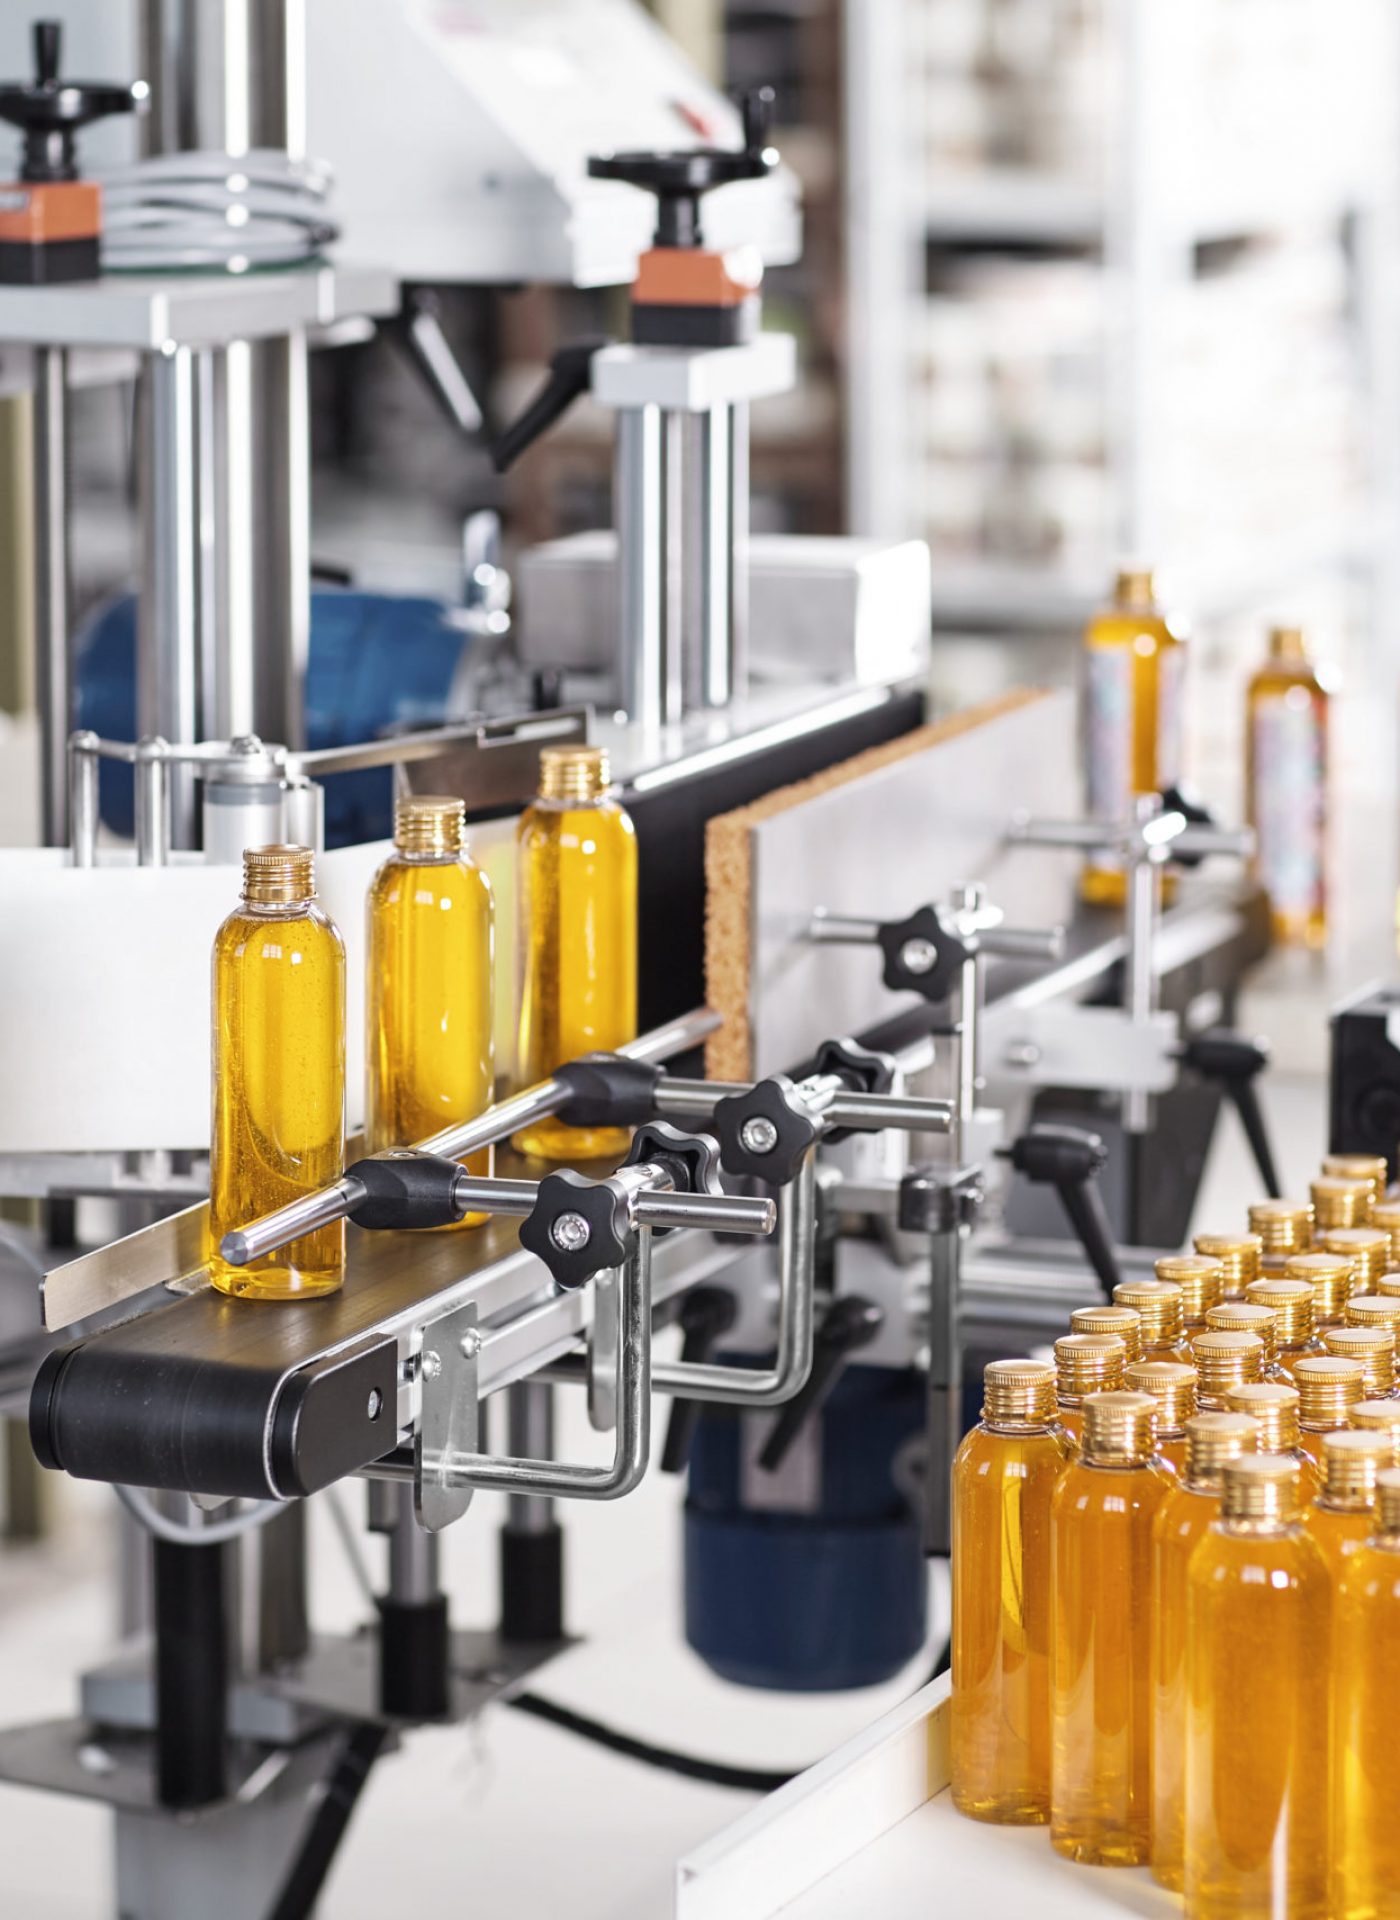 Horizontal shot of cosmetics or pharmacy plant with automated equipment. Transparent plastic bottles filled with yellow substance standing on desk and conveyor line, ready for transportation